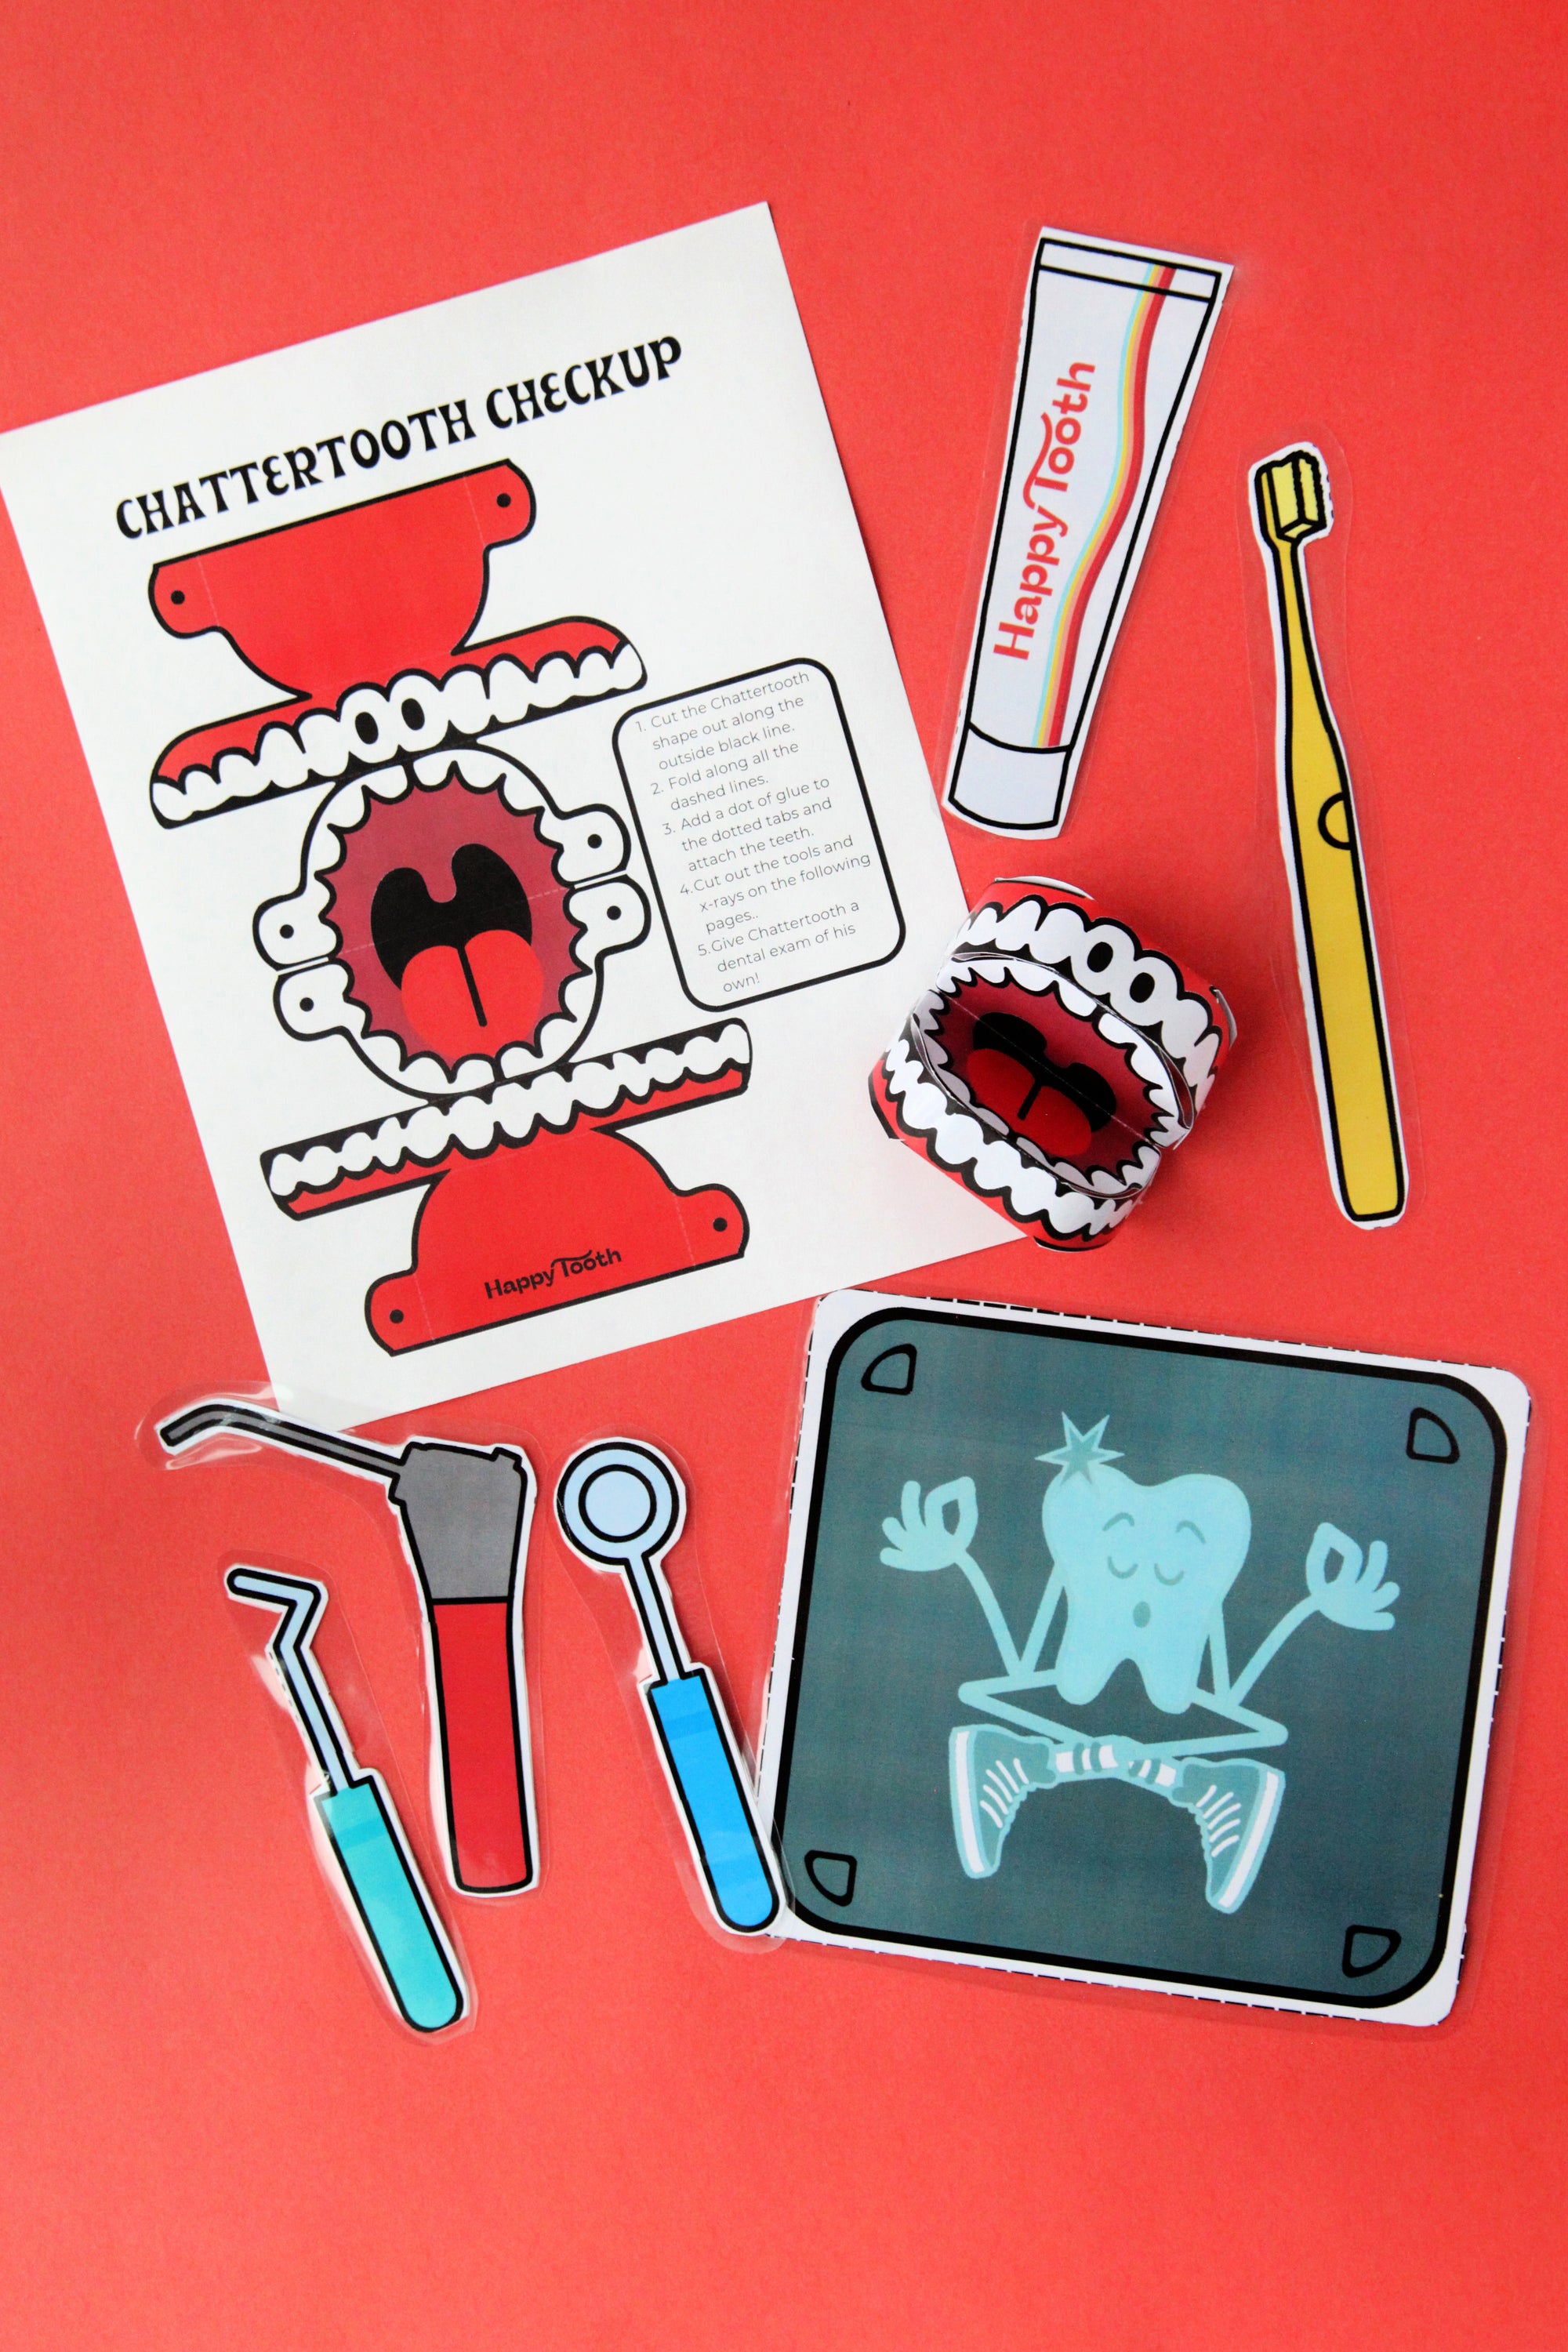 Happy Tooth Printable Activity Pack